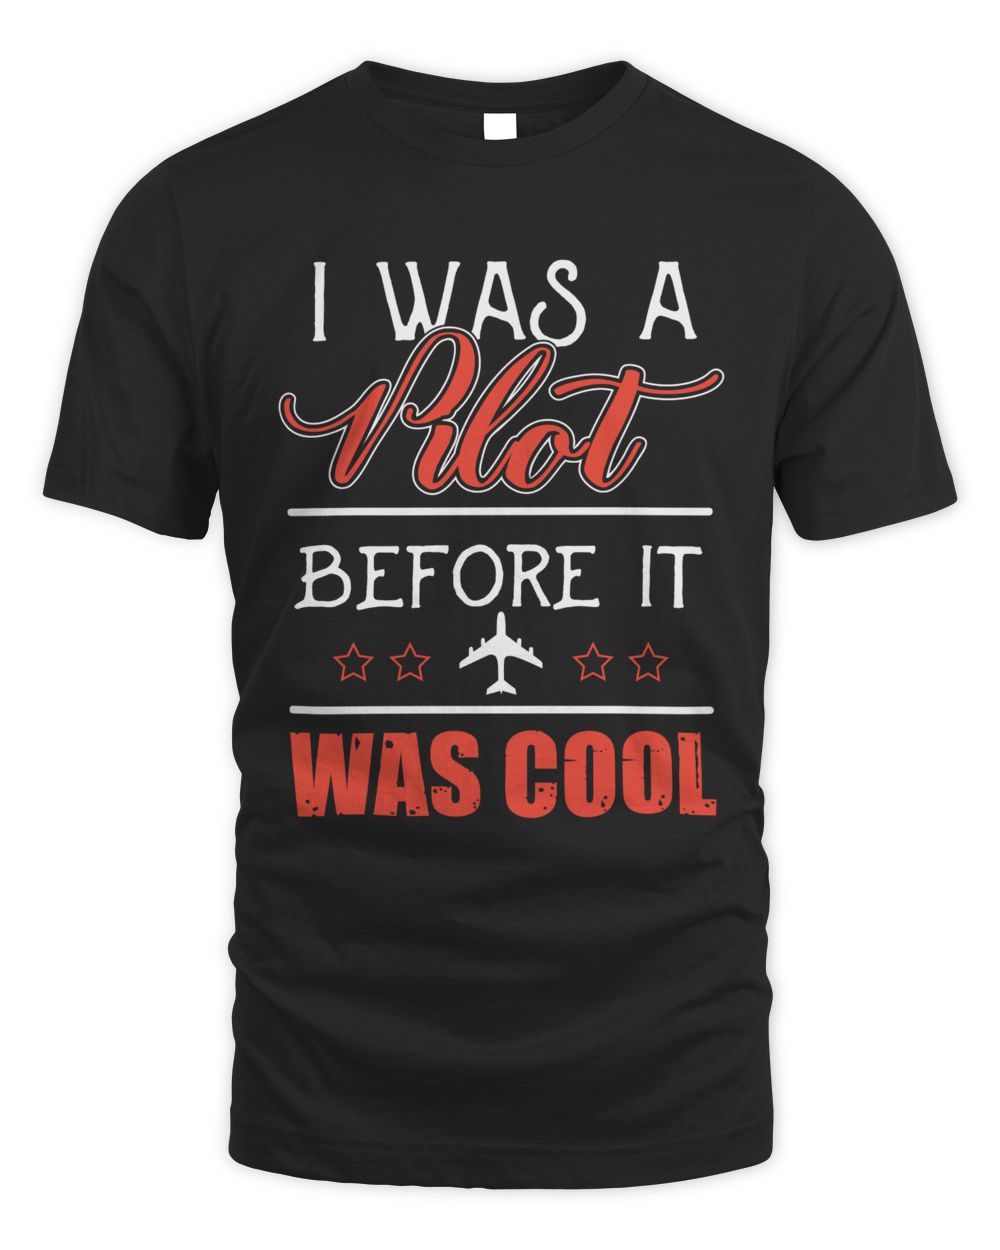 I was a pilot before it was cool Unisex Standard T-Shirt black 